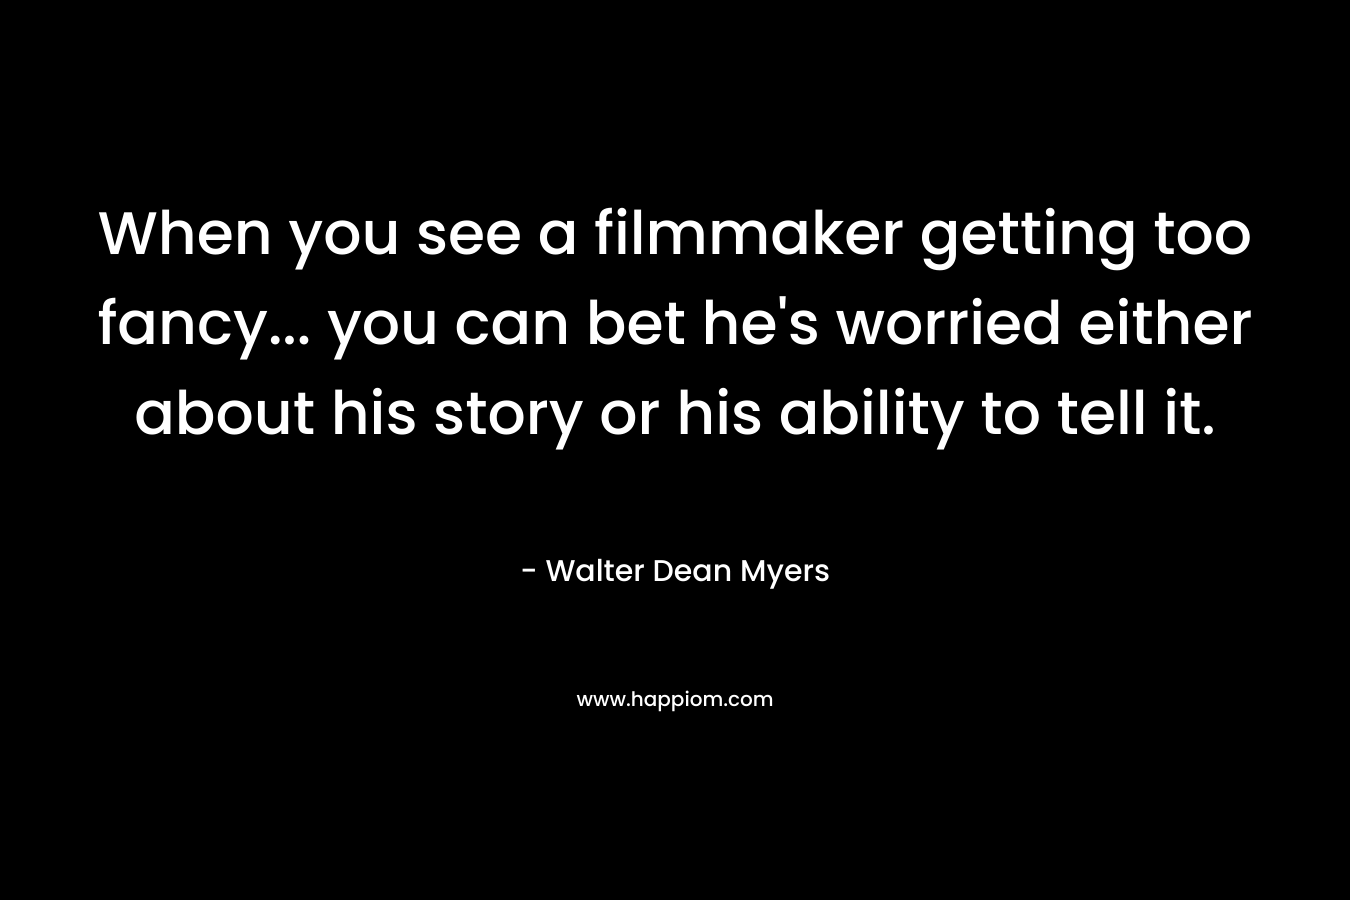 When you see a filmmaker getting too fancy... you can bet he's worried either about his story or his ability to tell it.